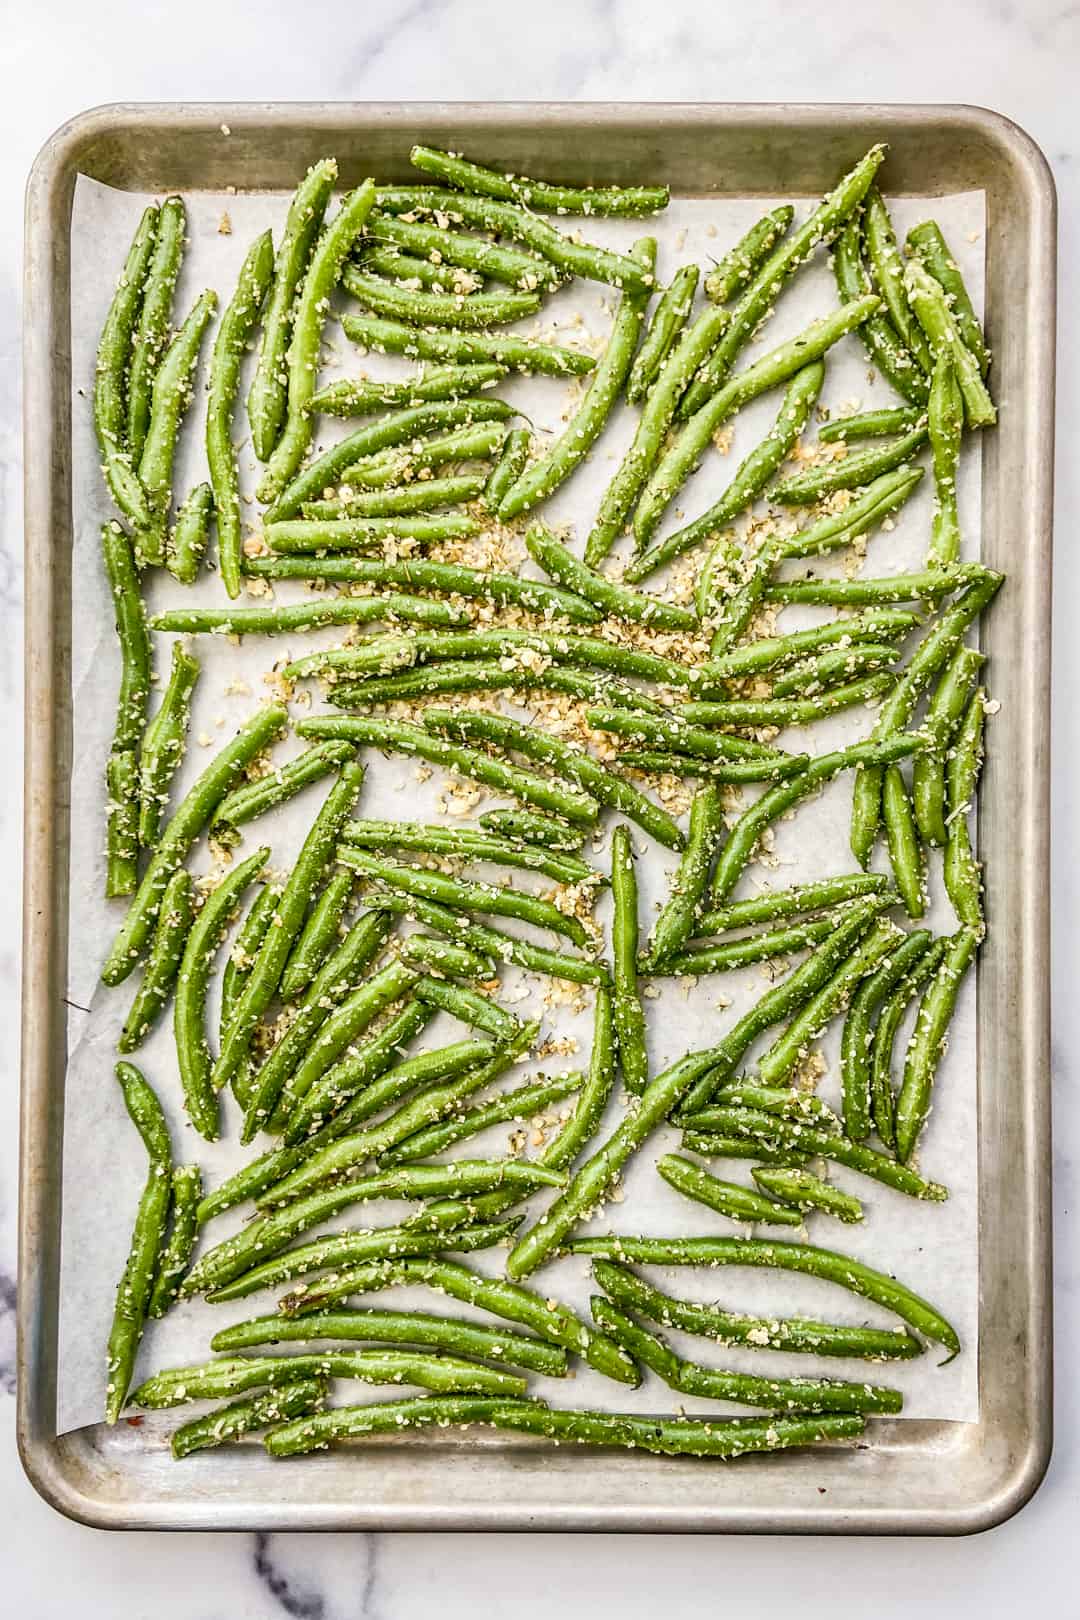 Parmesan green beans on a baking sheet before going in the oven.